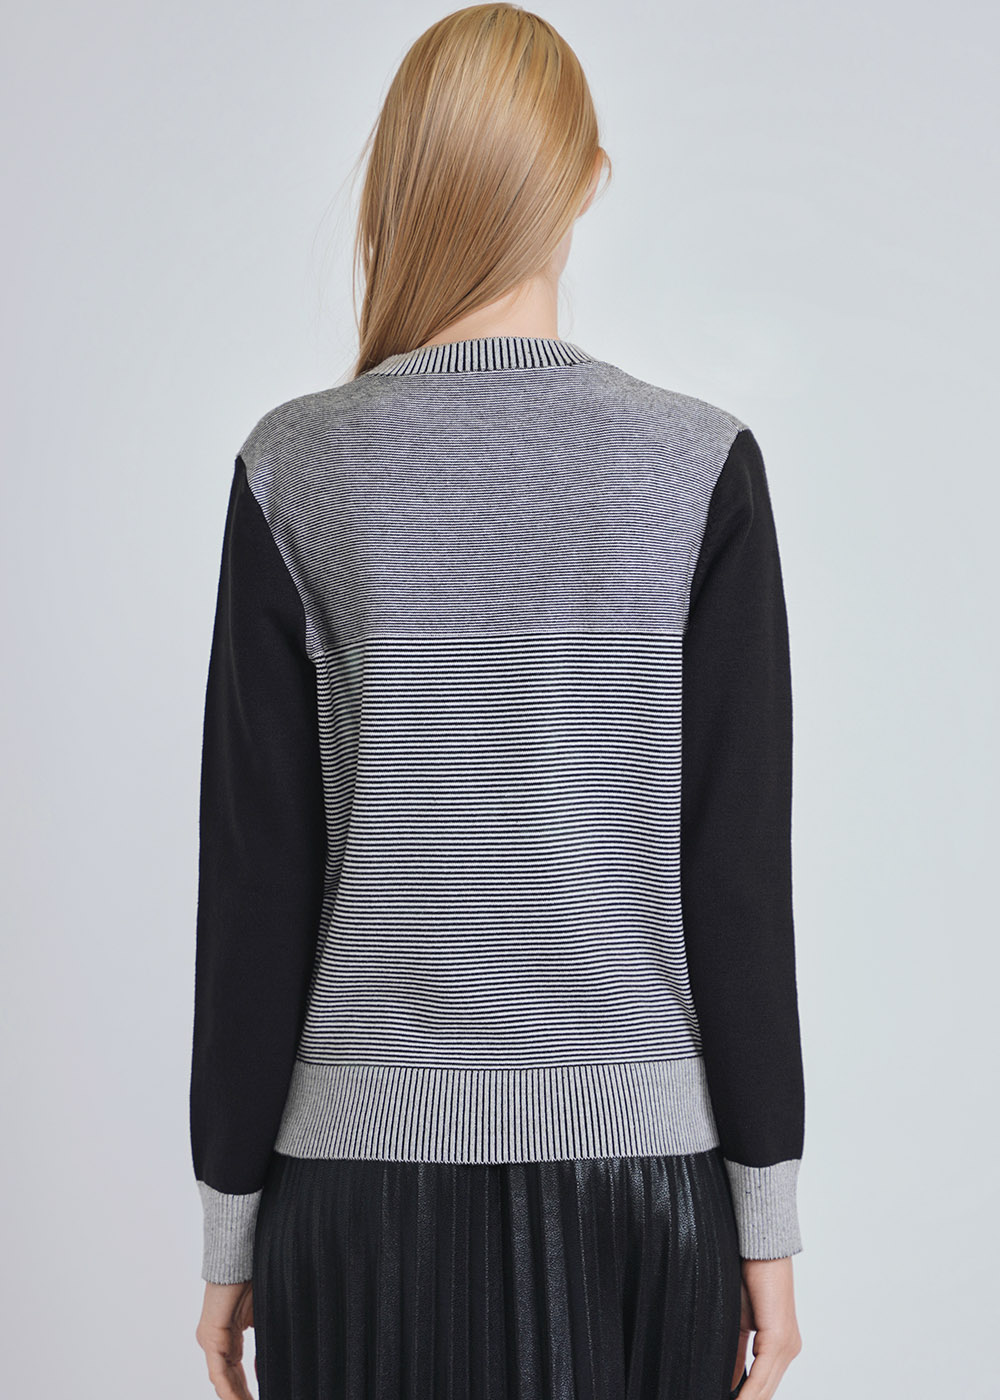 Dynamic Duo: Black Sleeved & Striped Core Knit Top